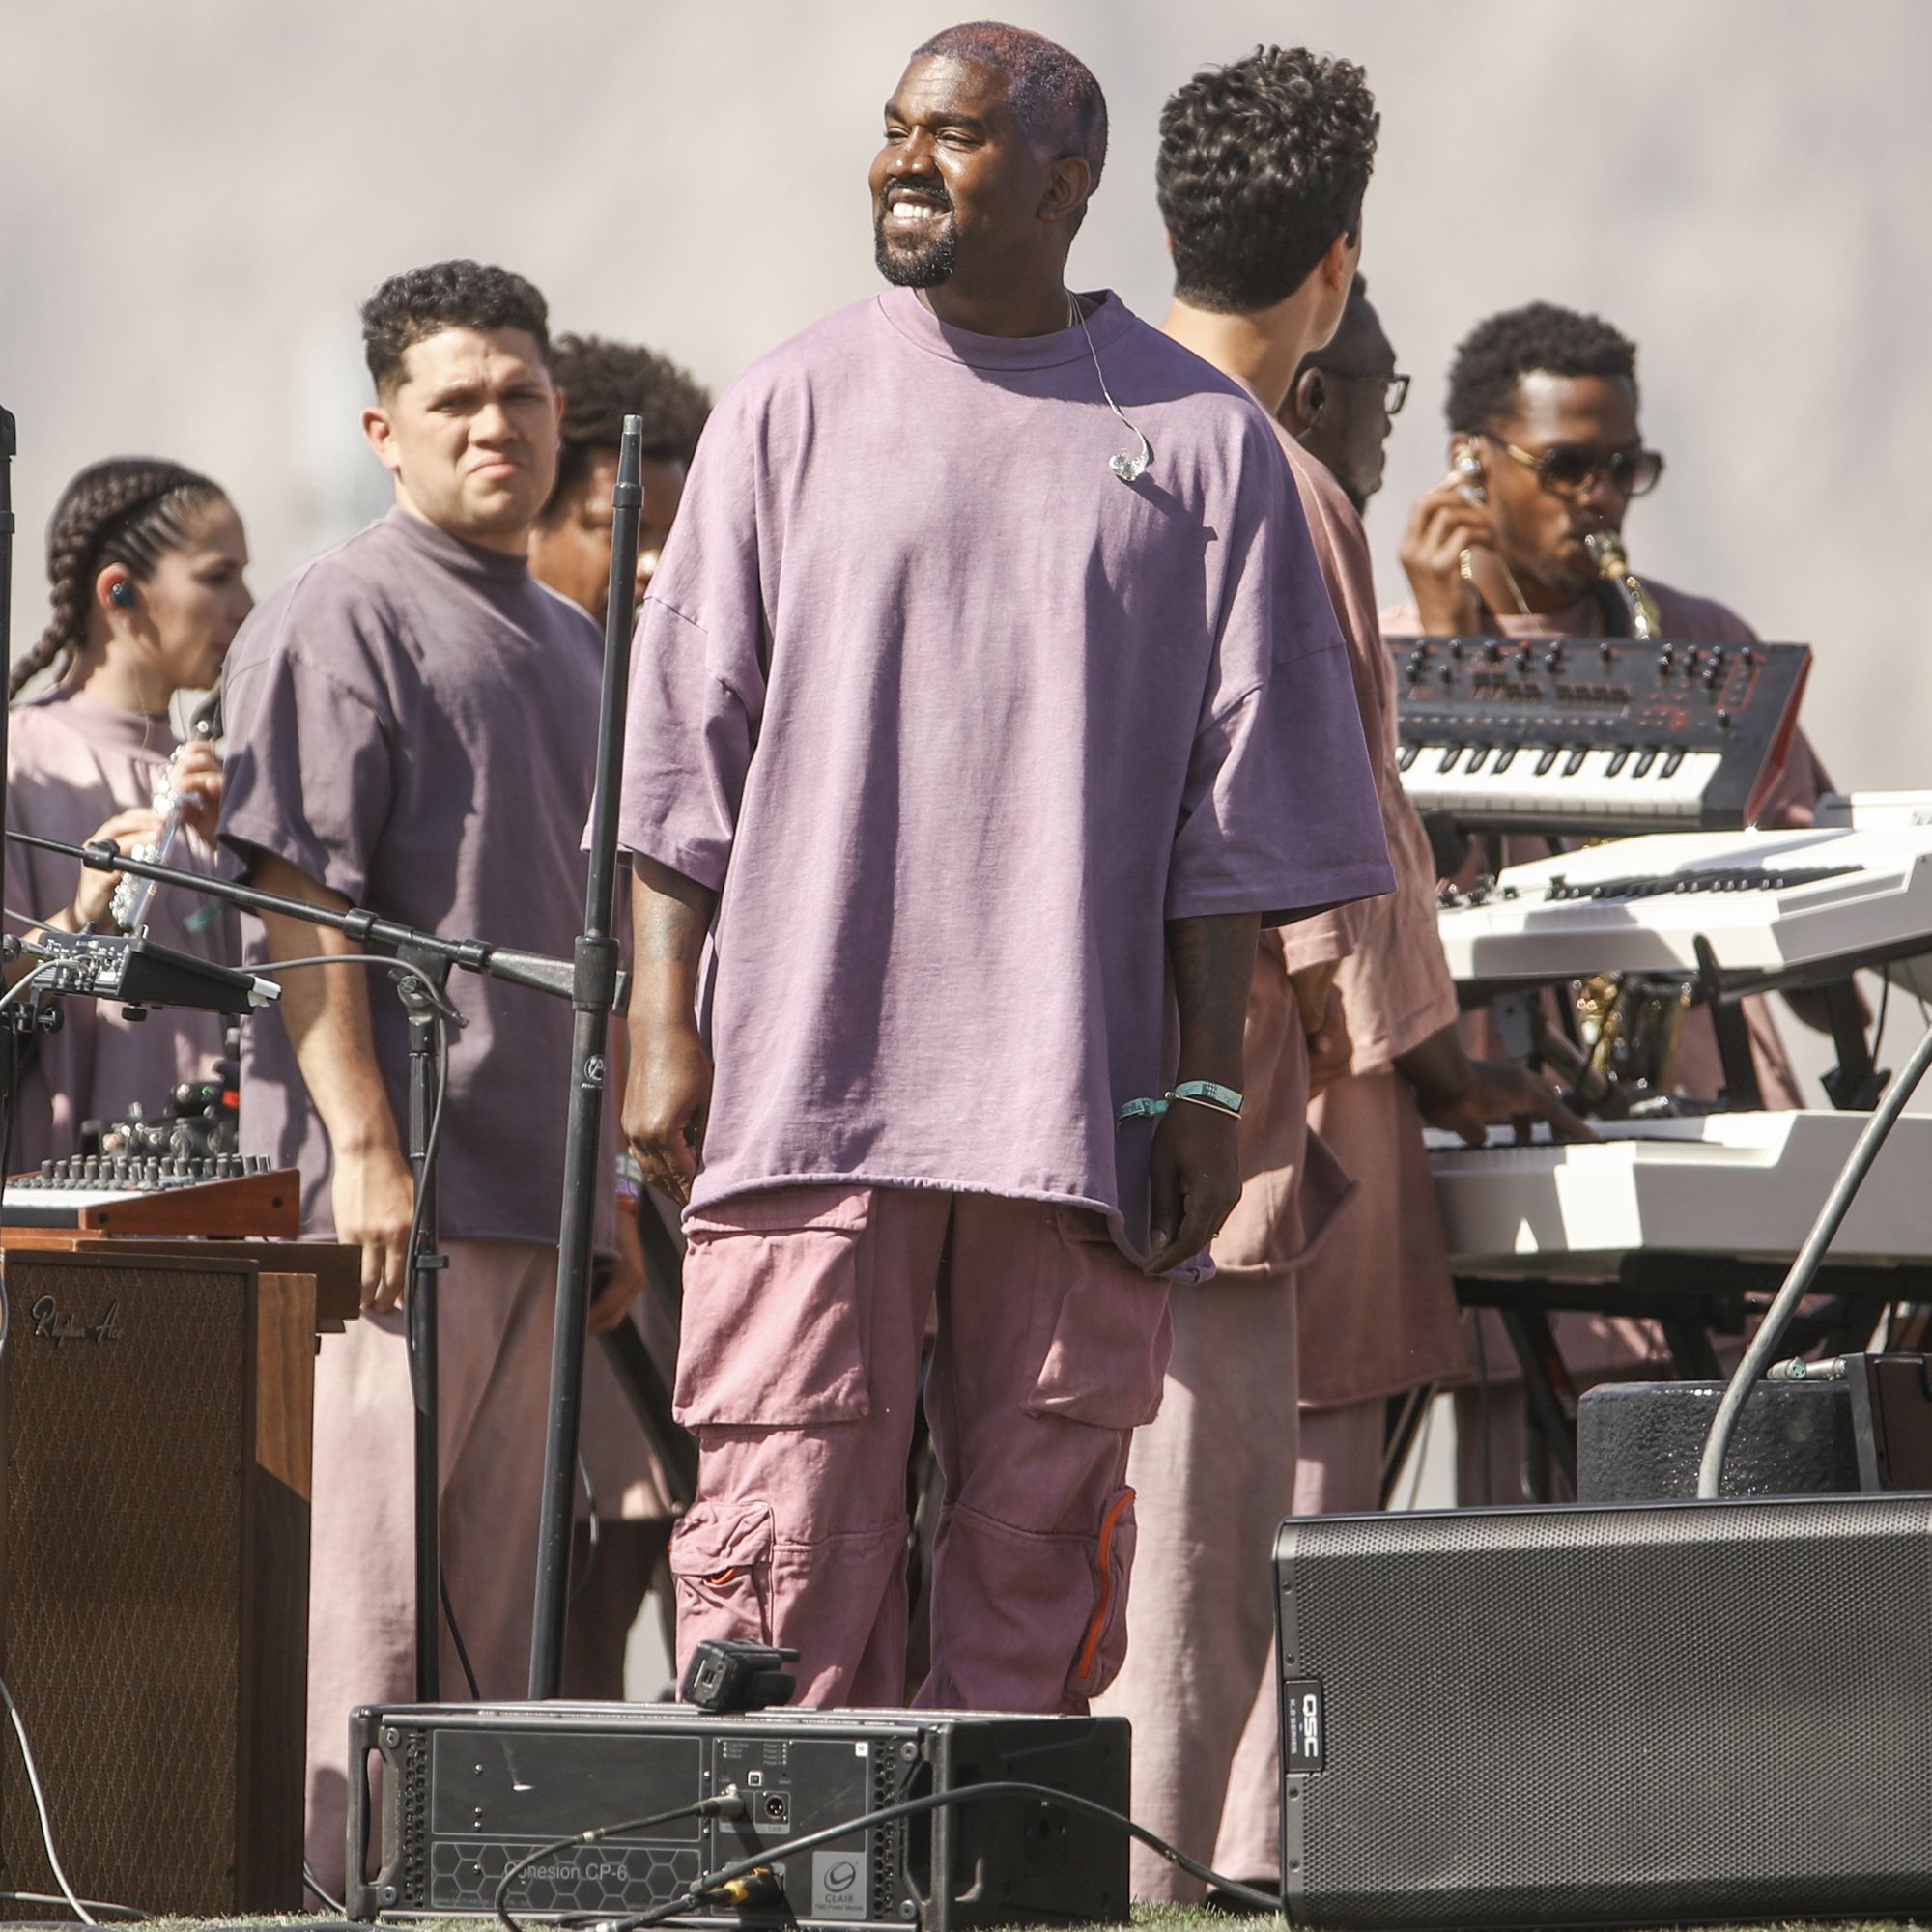 Why Kanye West Dropped Out of Coachella Two Weeks Ahead of Festival